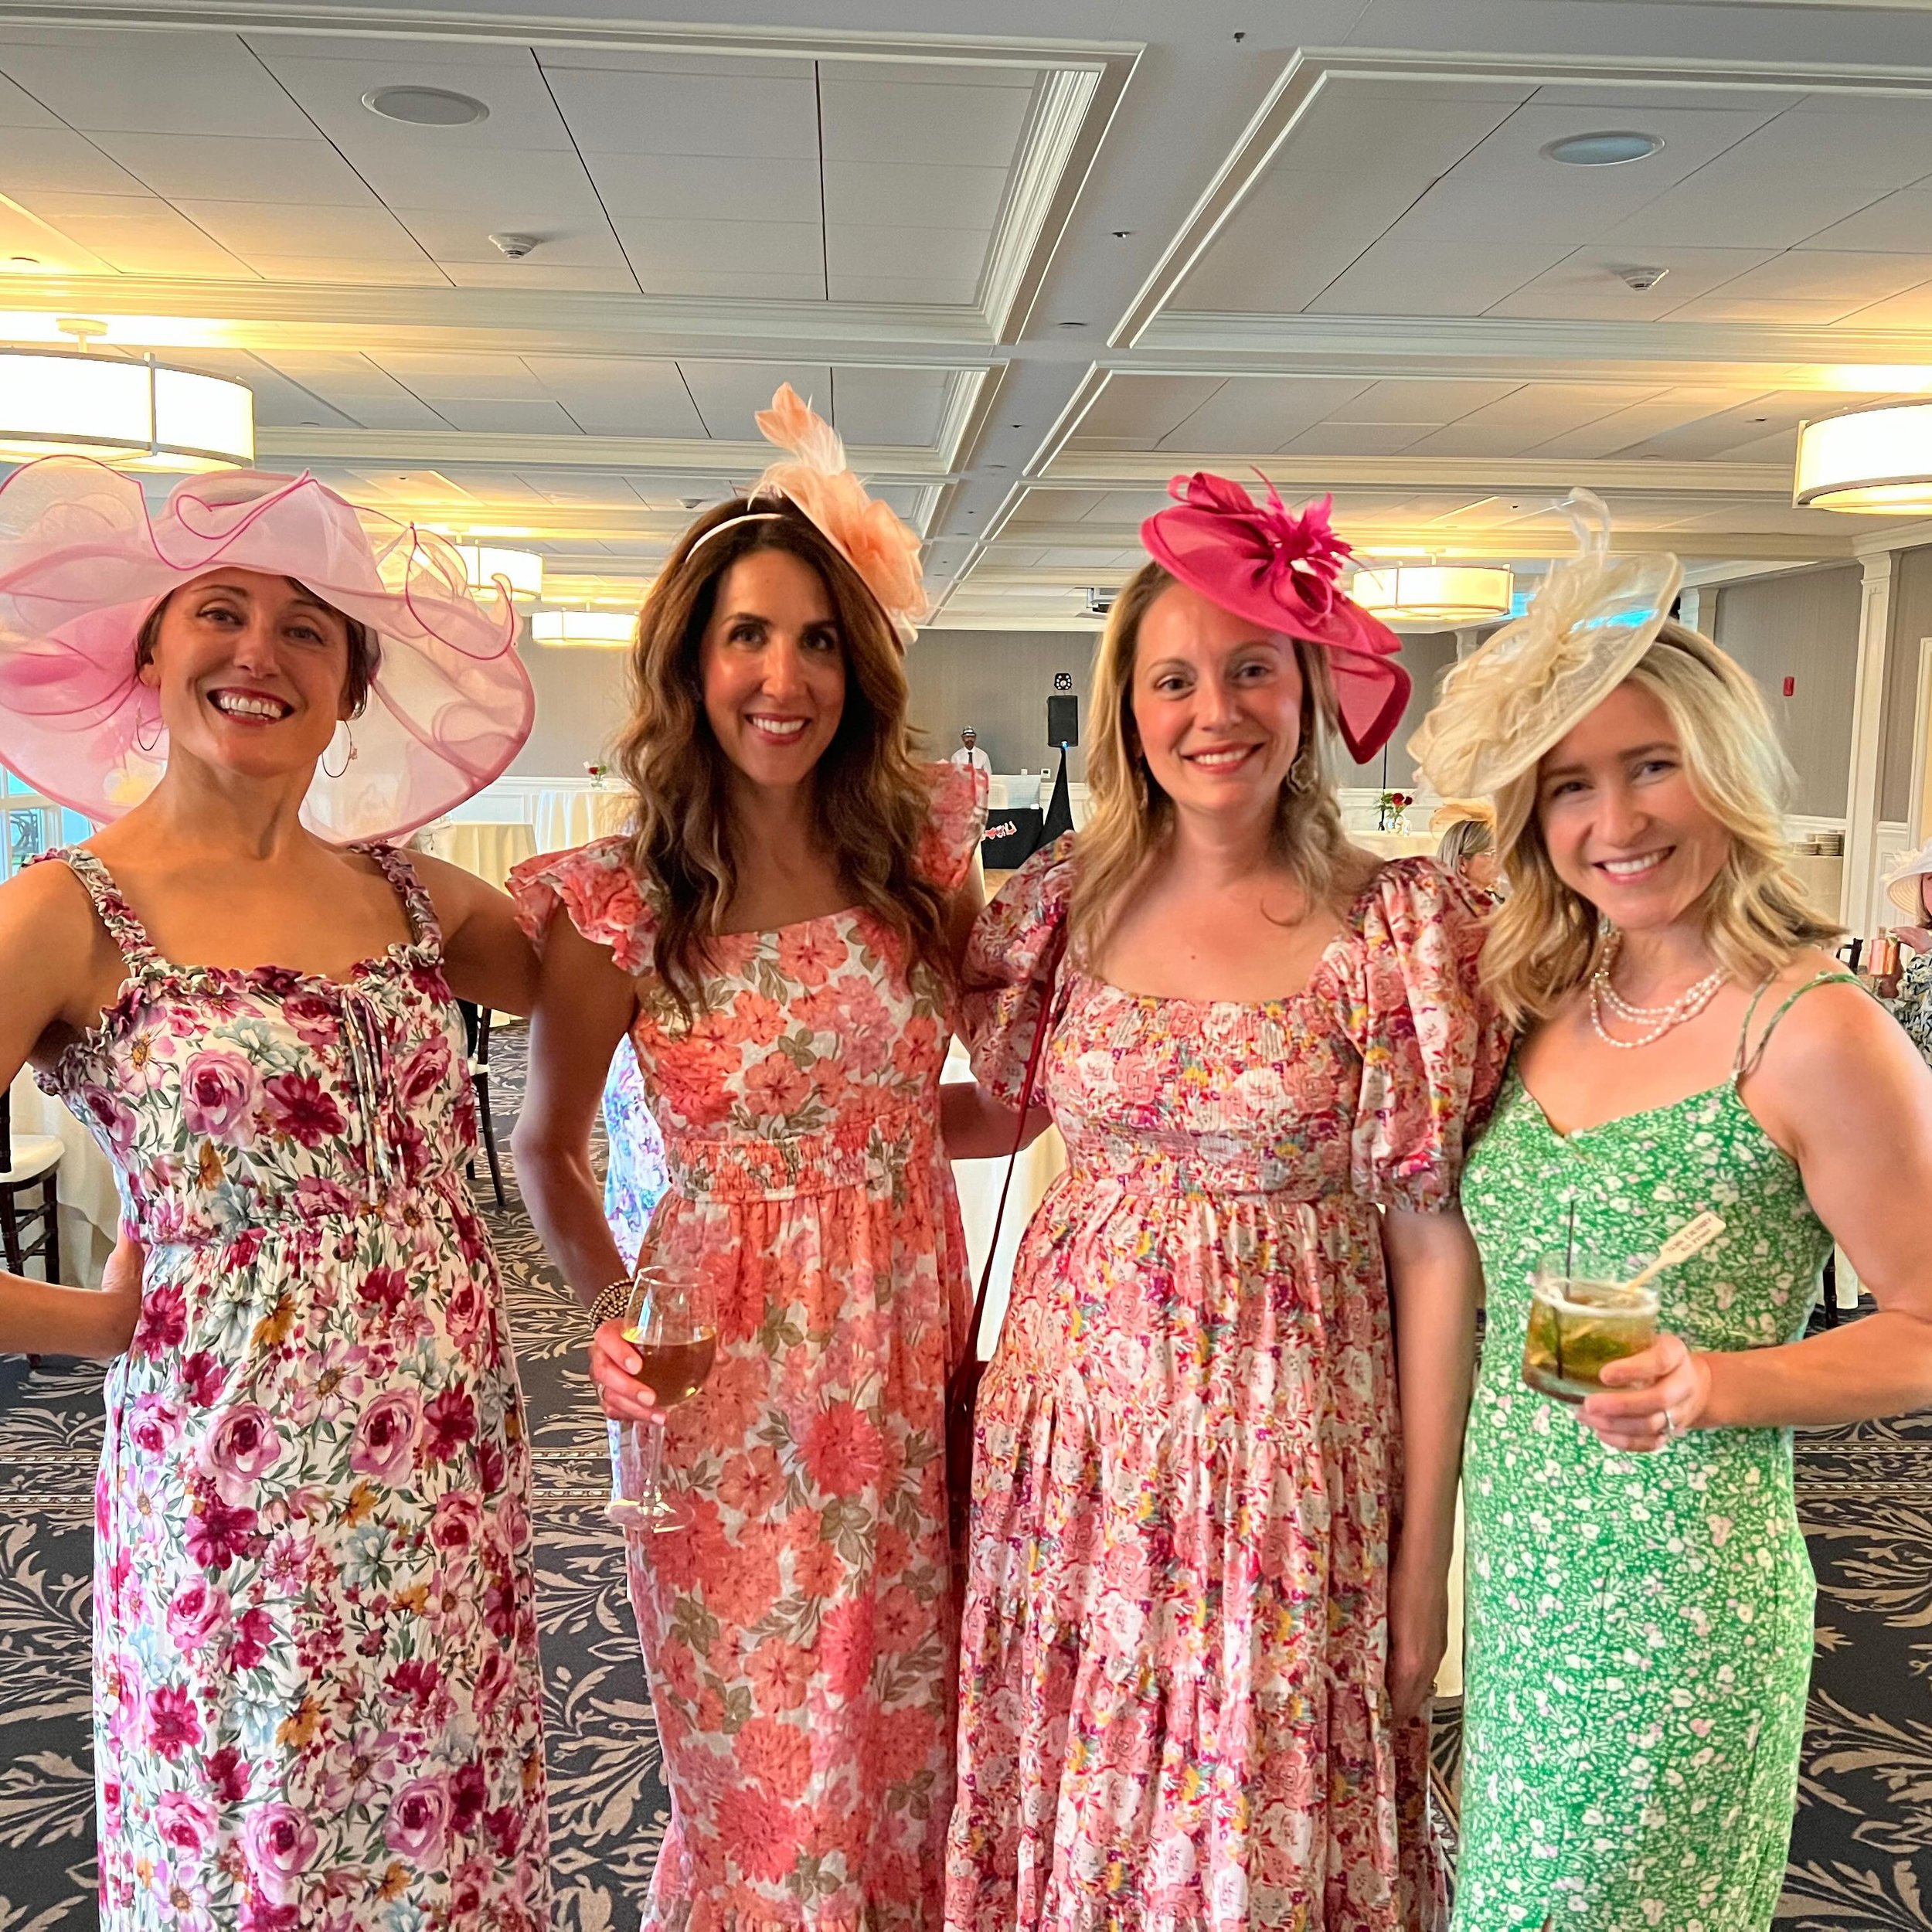 Spotted VIVA in the wild, Kentucky Derby style last night! 🐎🌹 

I love seeing your best VIVA looks especially at an event for a great cause, supporting local individuals in crisis. @greaterbedfordwomenade_gbw